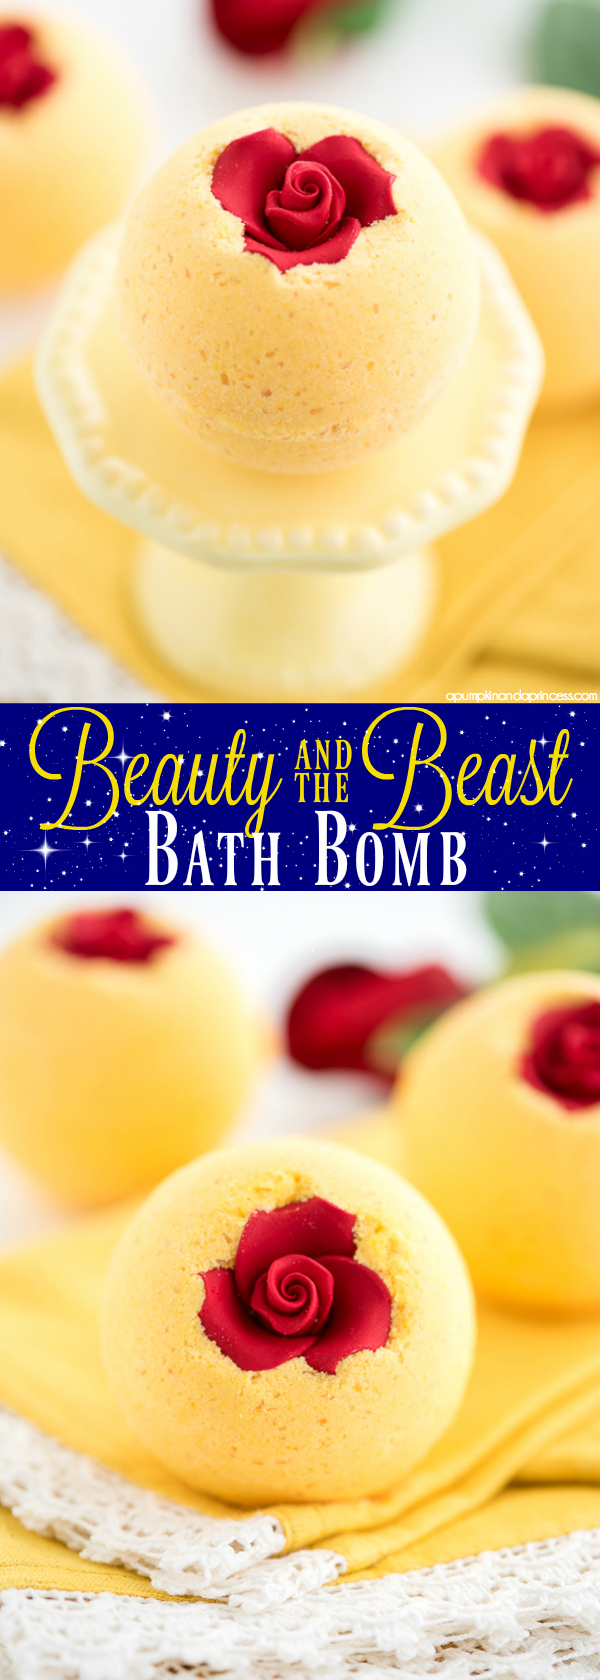 Beauty and the Beast Bath Bomb - Beauty and the Beast Bath Bomb -   20 beauty And The Beast diy ideas